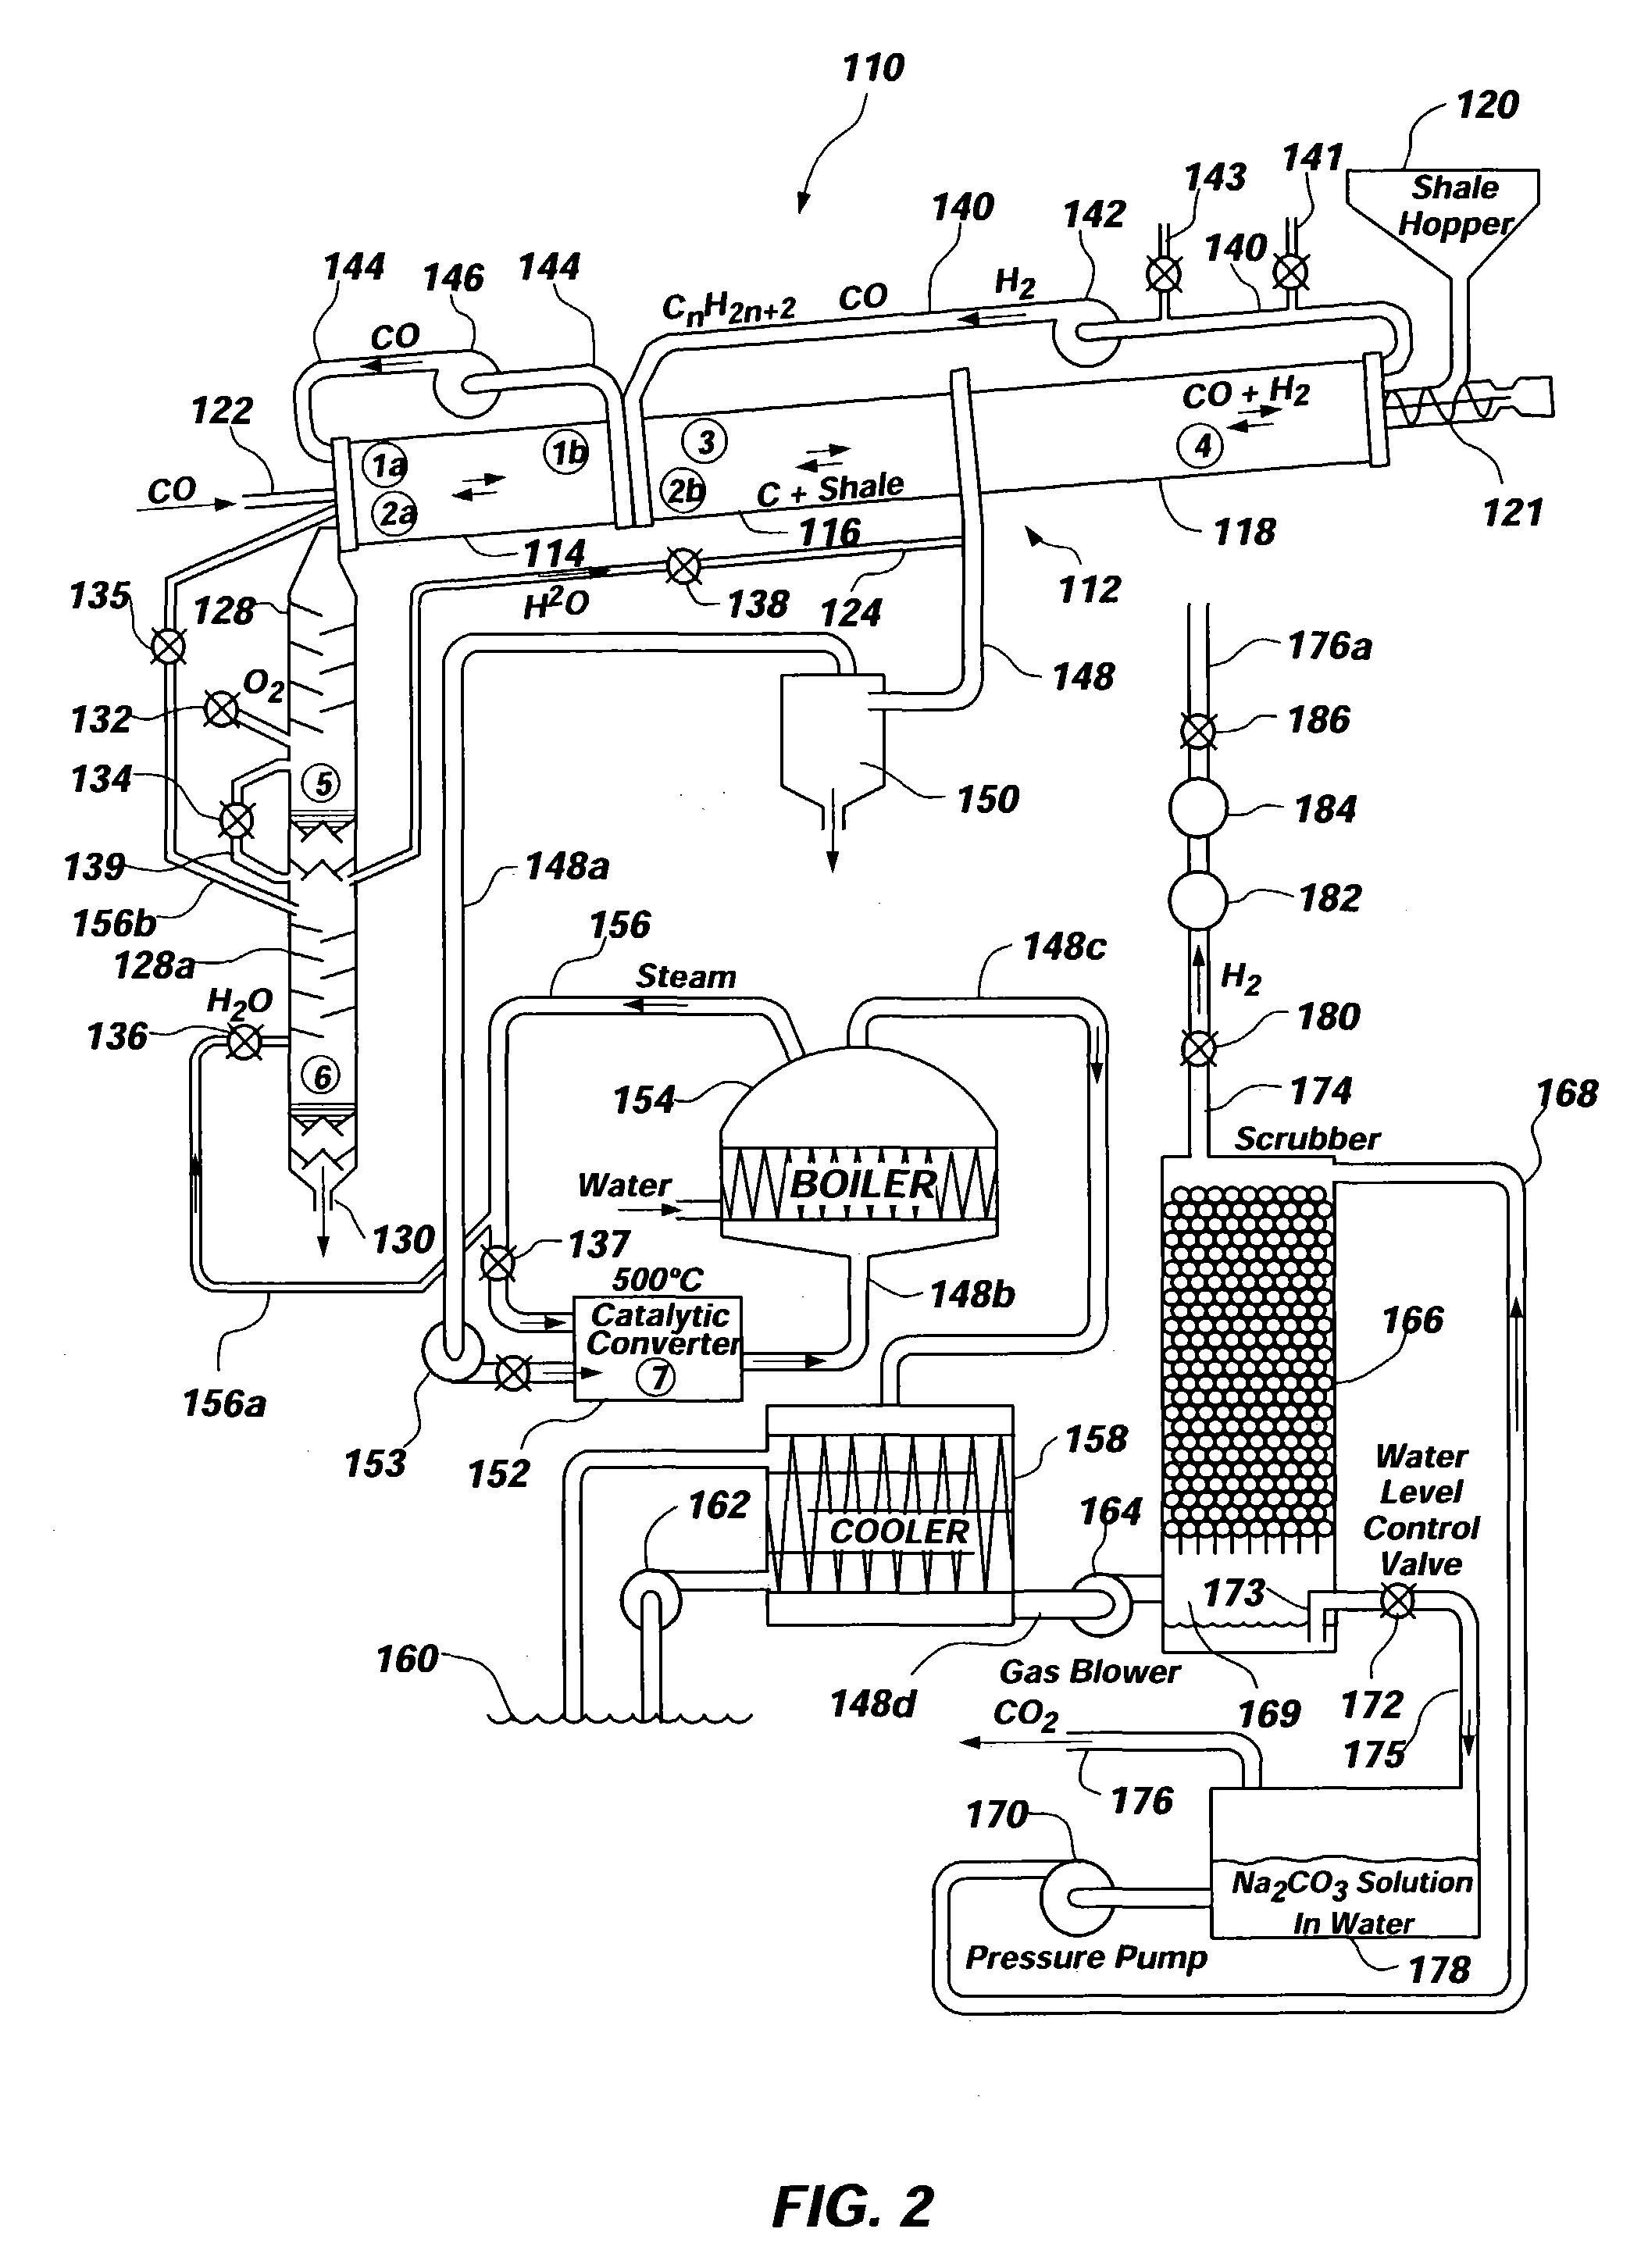 Process and apparatus for generating hydrogen from oil shale